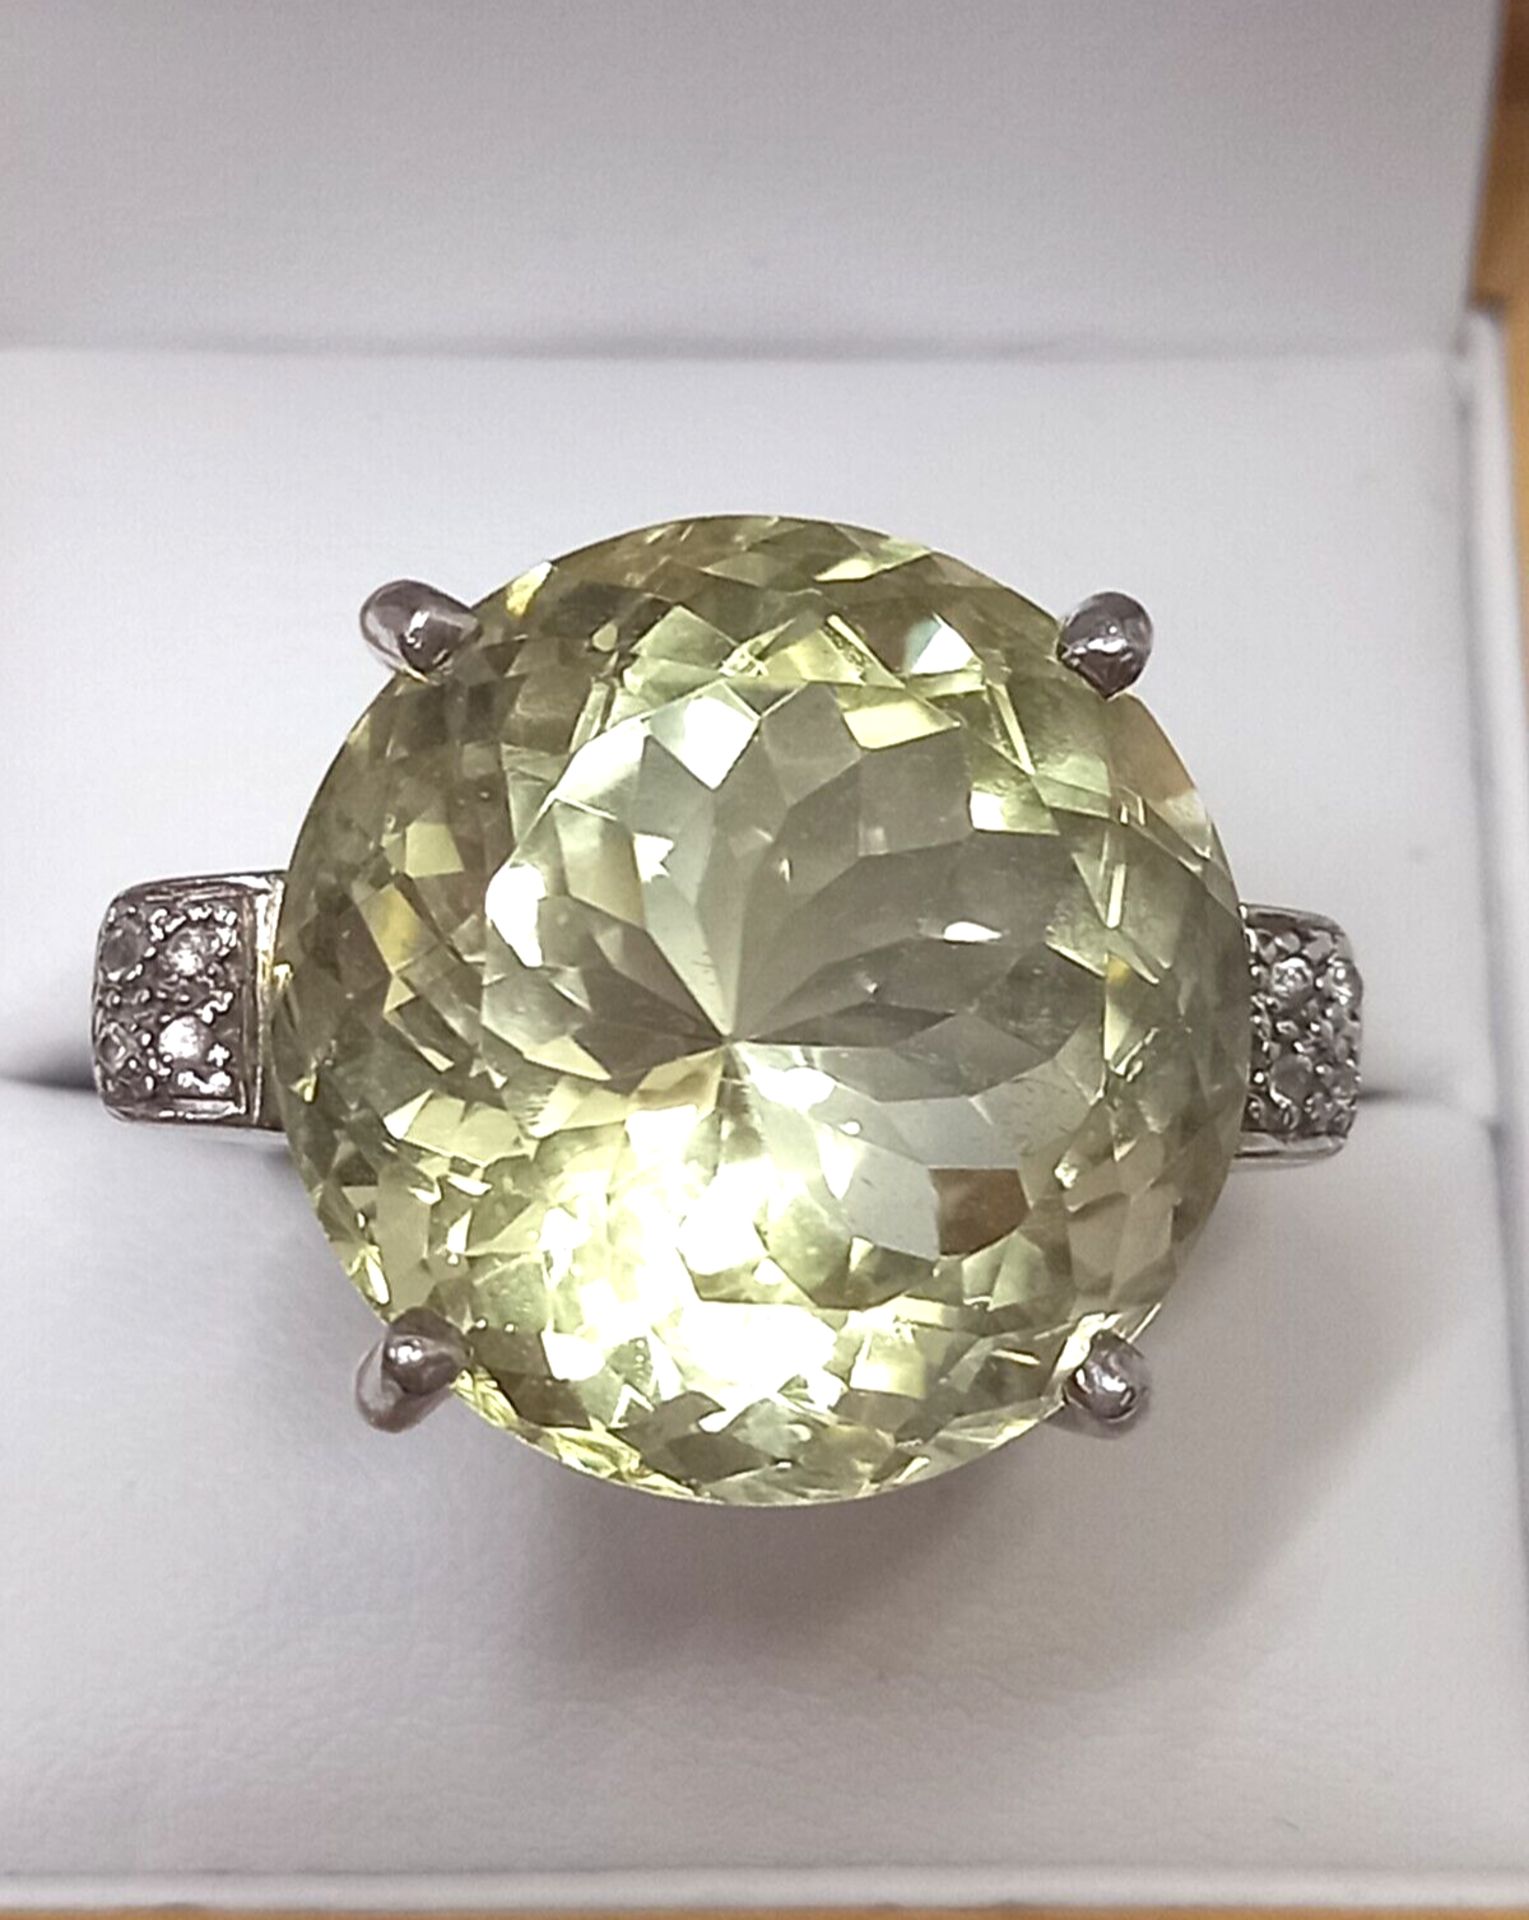 LIME GREEN CRYSTAL DRESS RING WITH DIAMONDS - Image 3 of 6